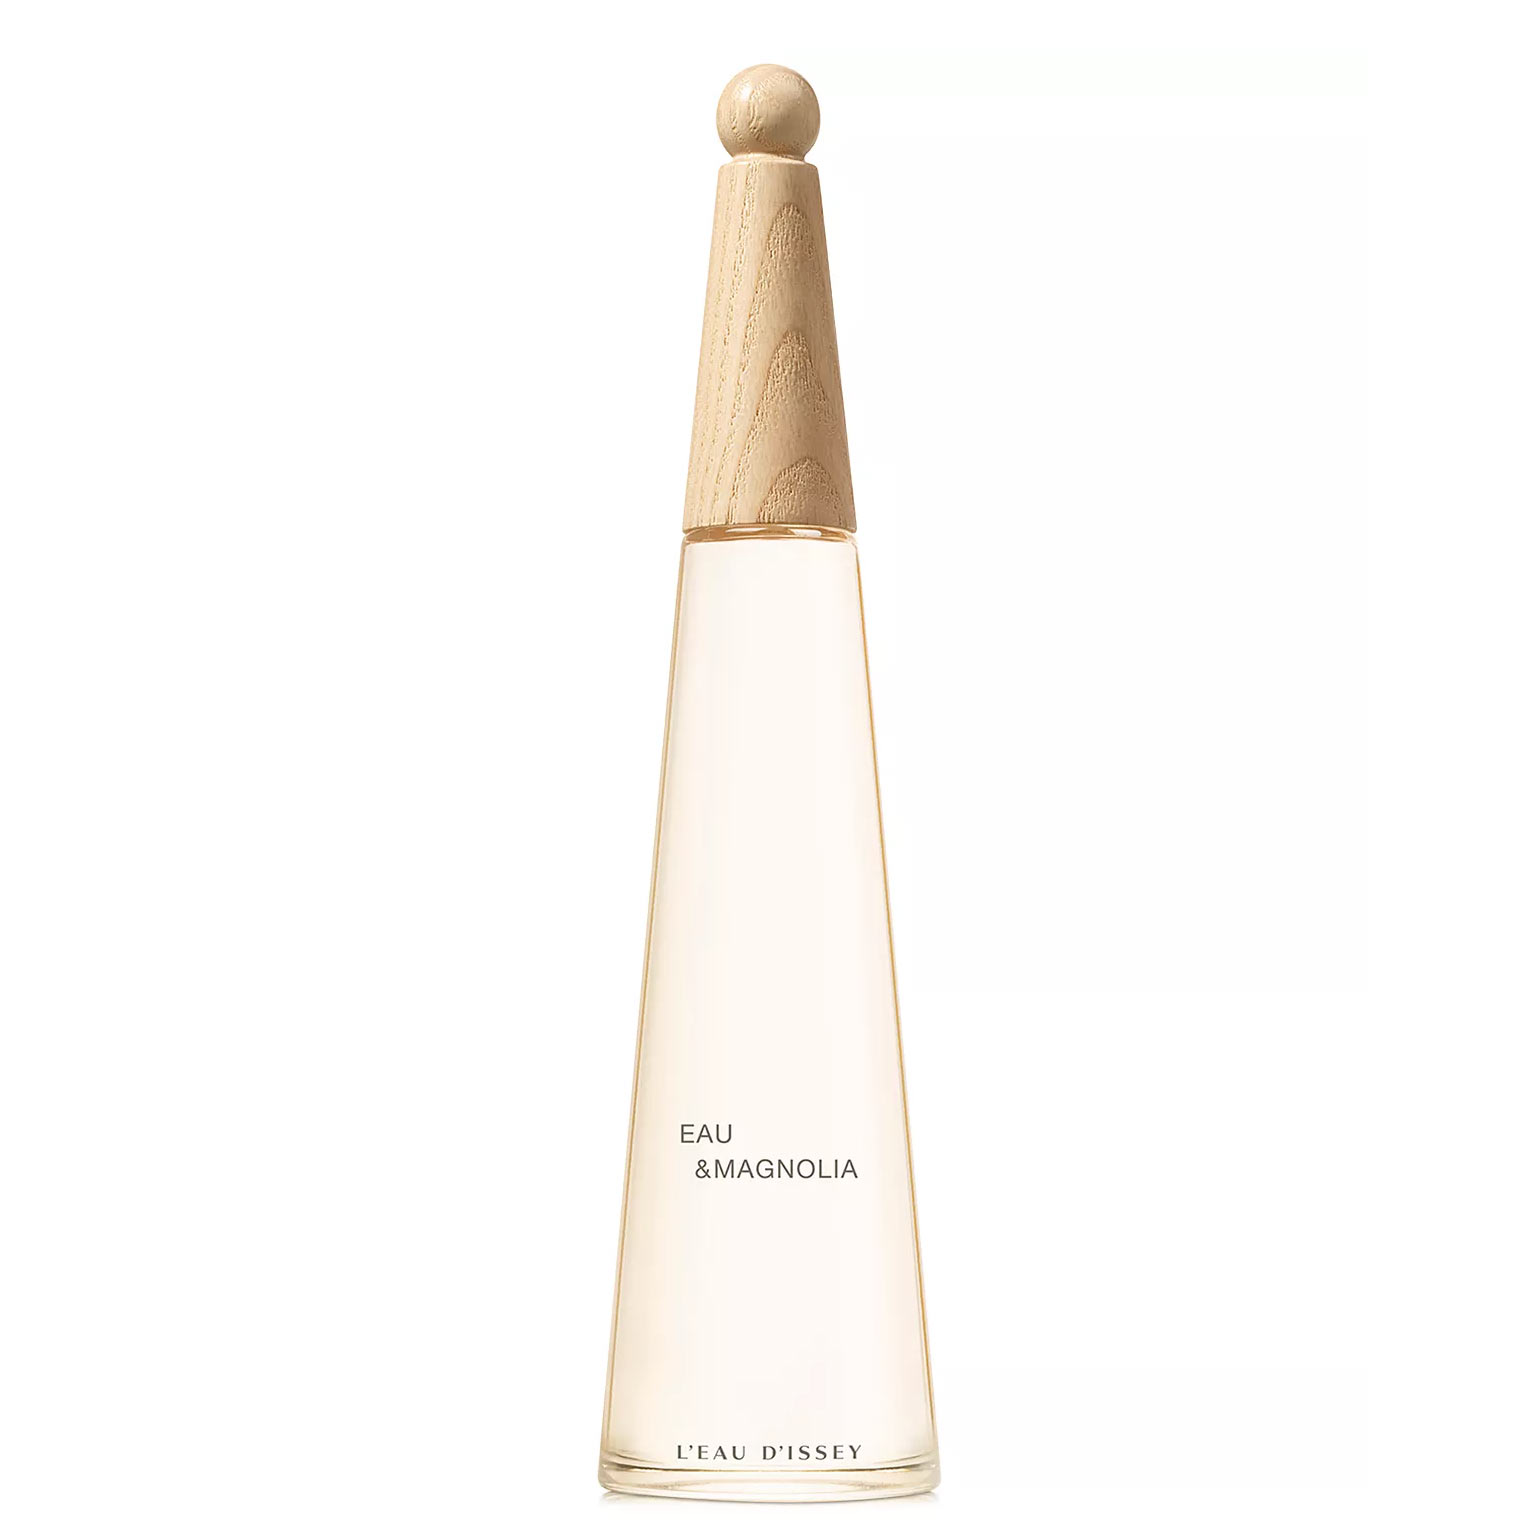 L'eau-D'Issey-Eau-and-Magnolia-Issey-Miyake